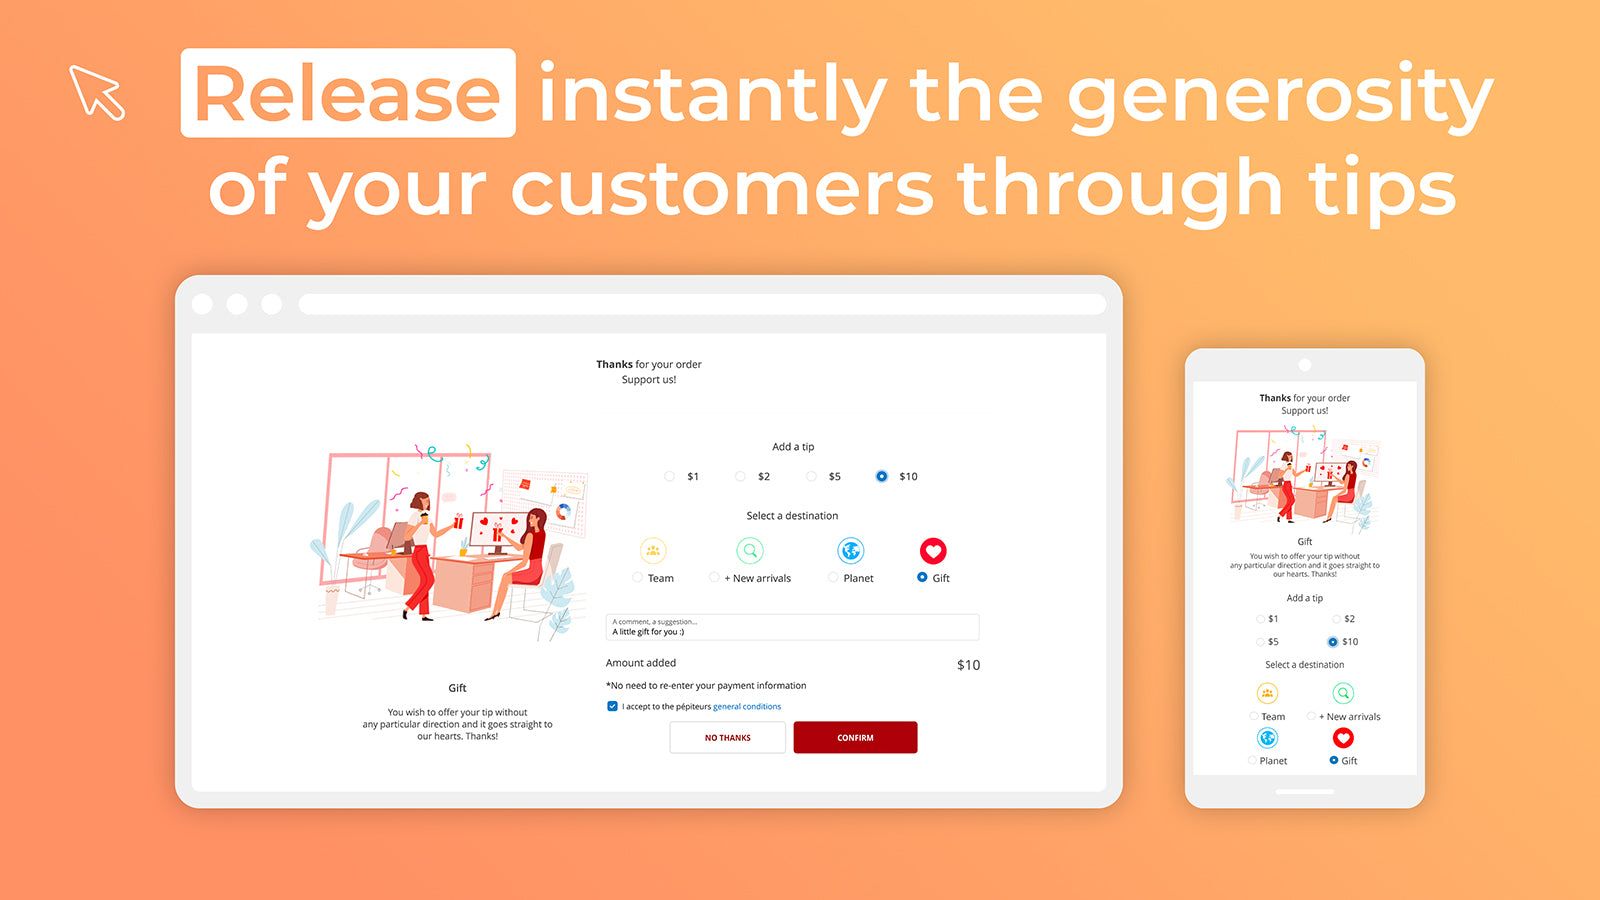 Release instantly the generosity of your customers through tips.